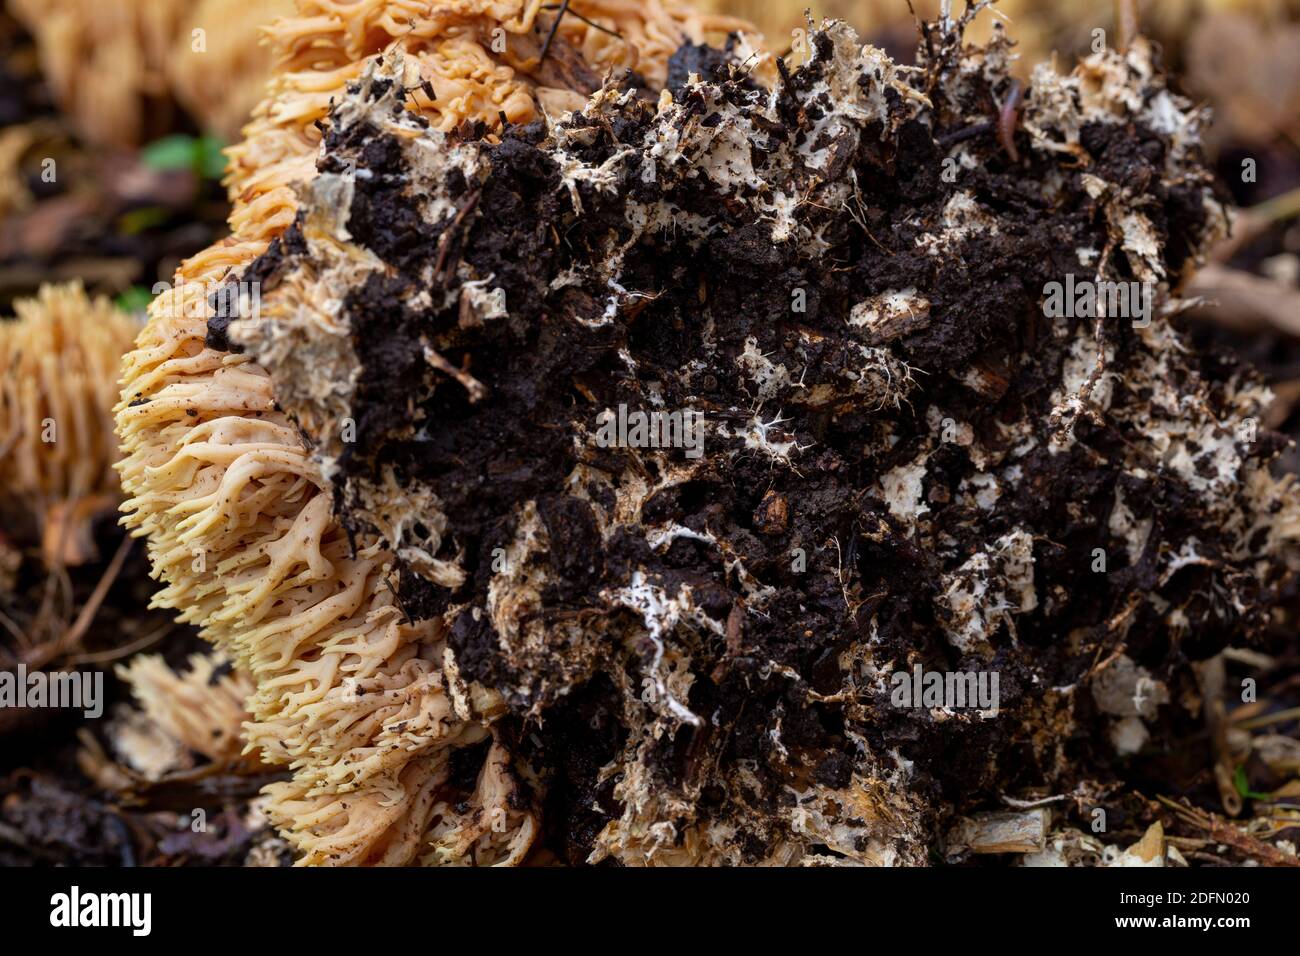 Ramaria stricta substrate Stock Photo